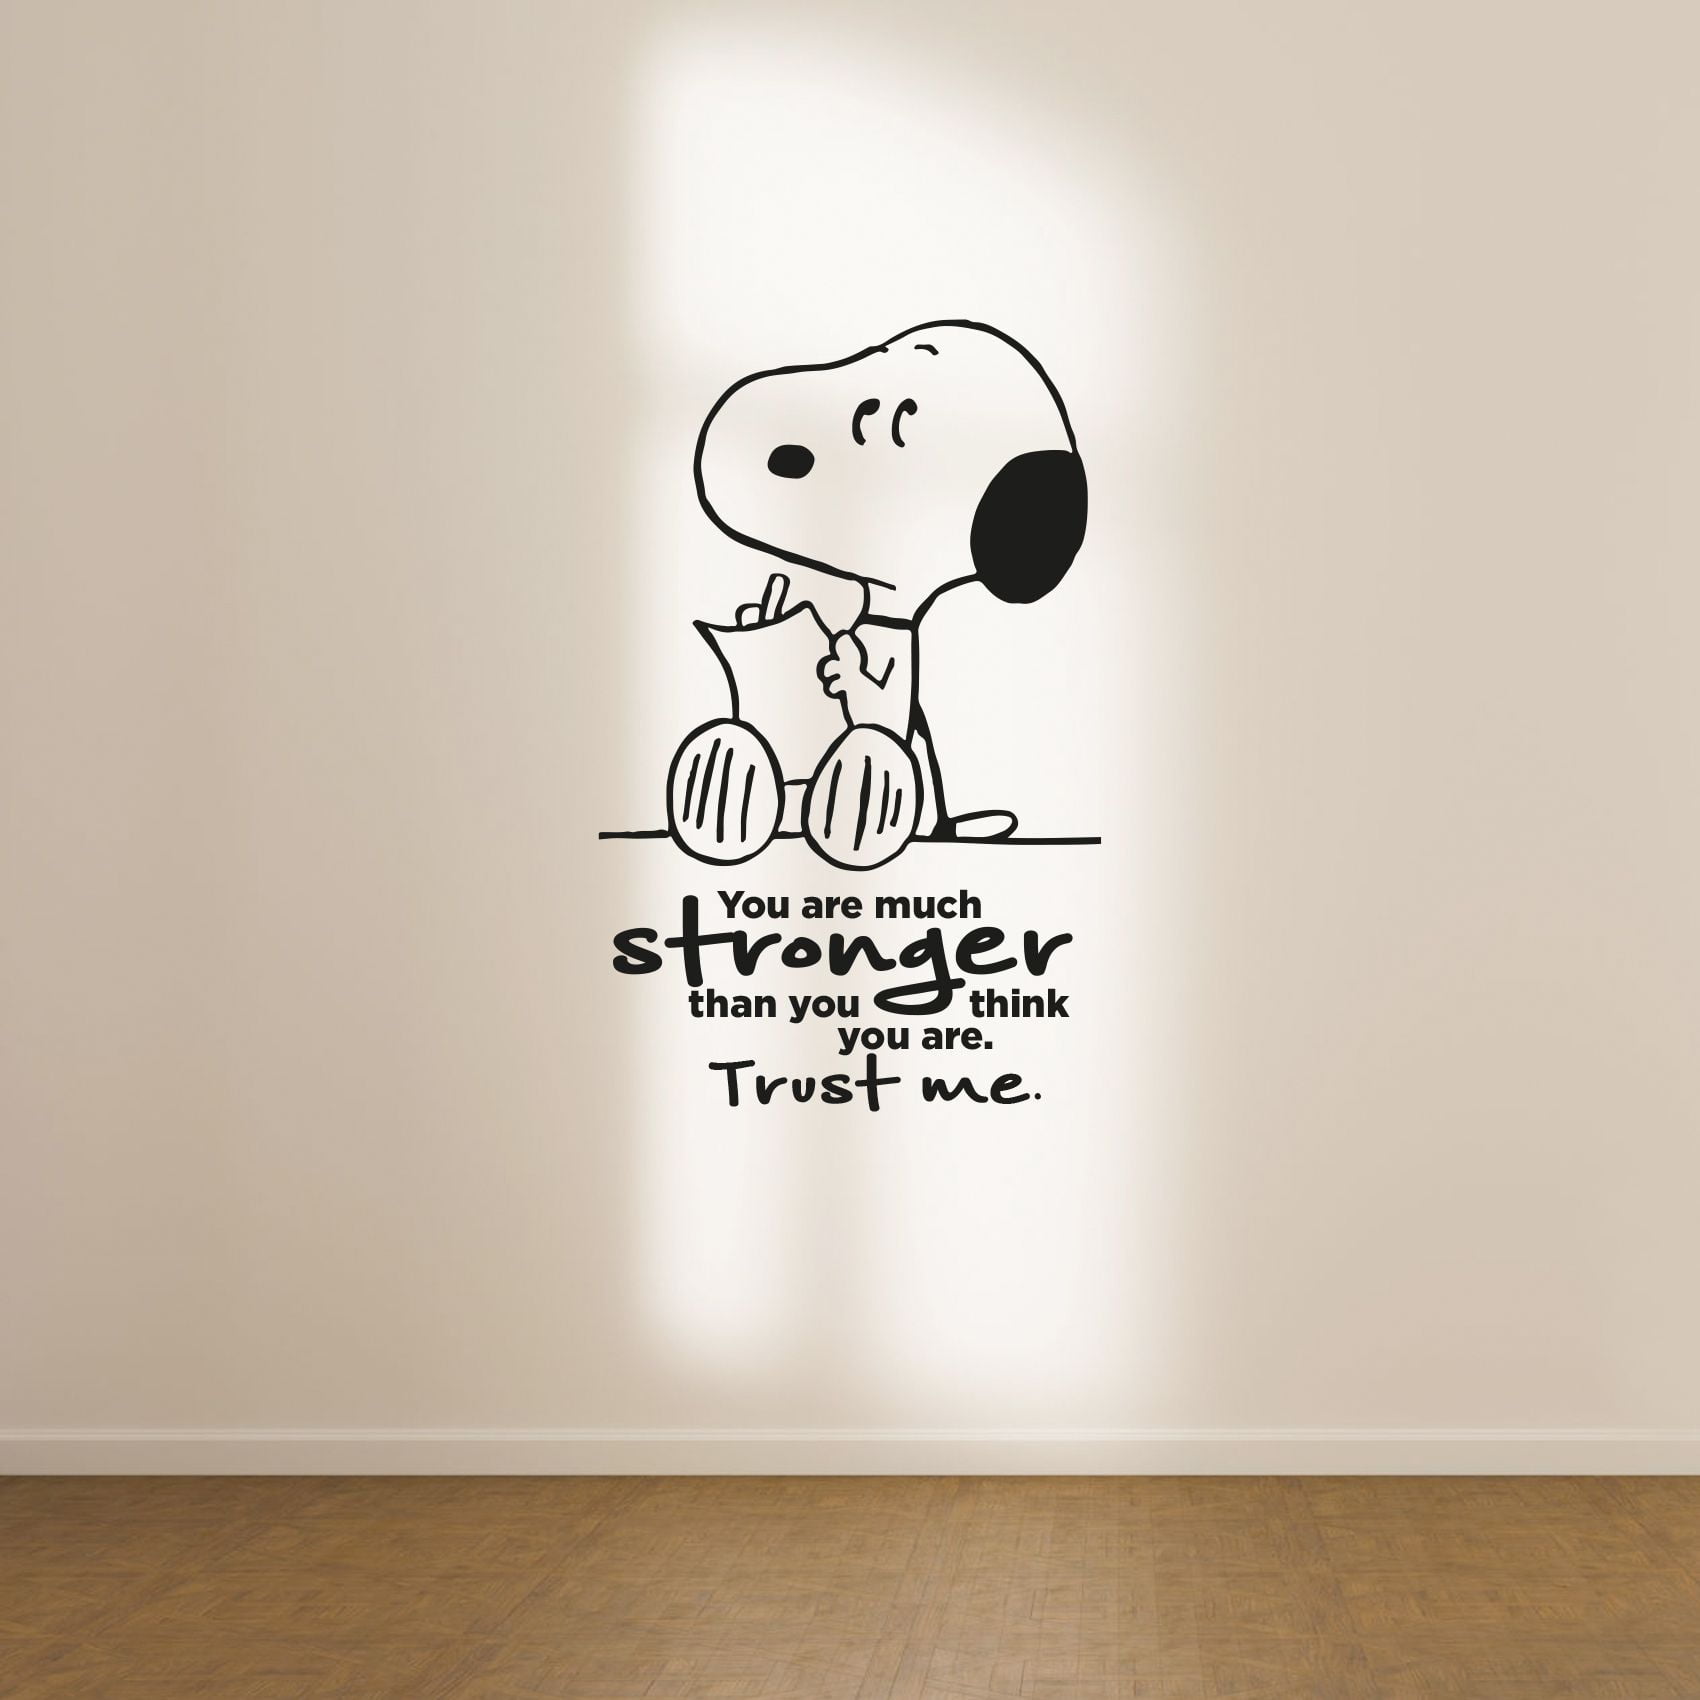 Snoopy Vinyl Wall Art Decal Quotes Home Kids Bedroom Living Room Sticker Design 